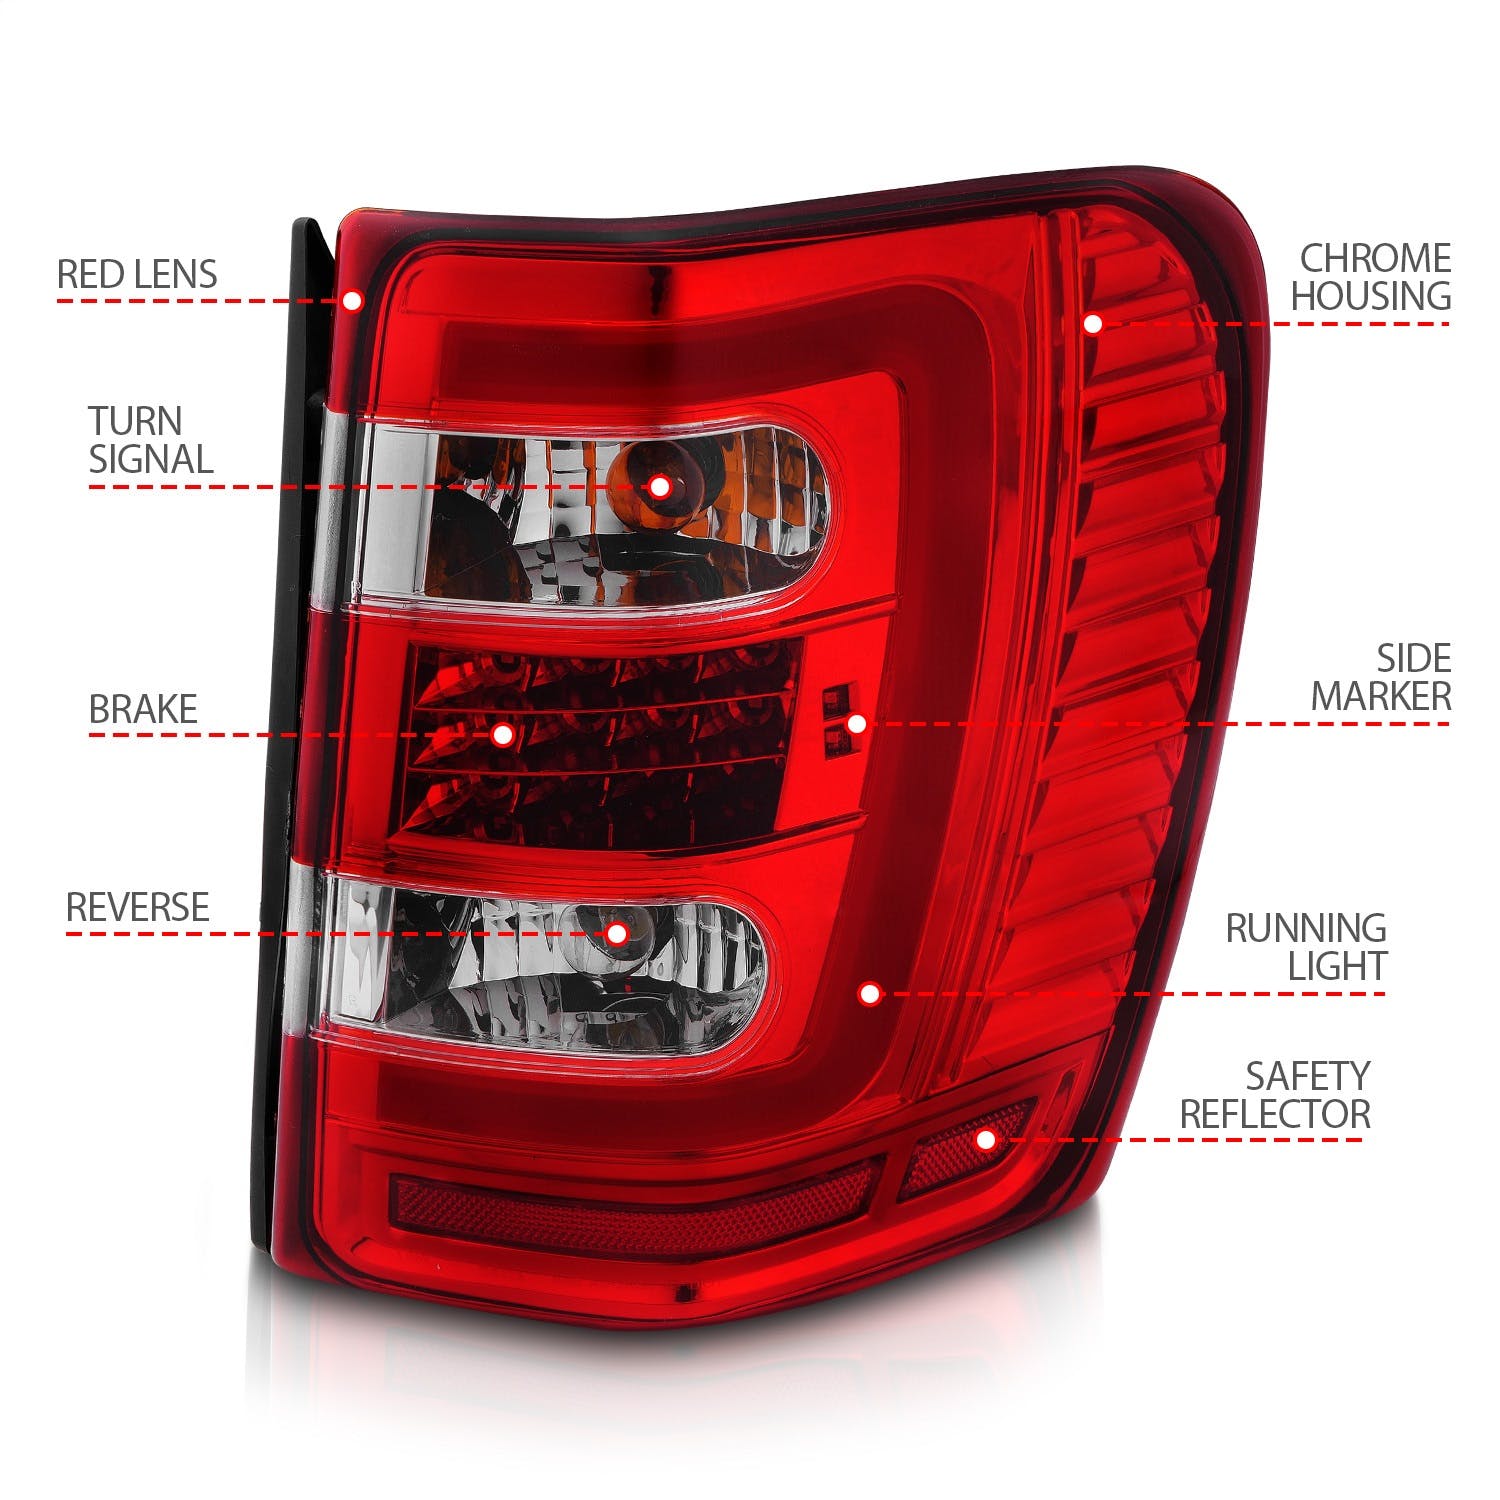 AnzoUSA 311396 LED Tail Lights with Light Bar Chrome Housing Red/Clear Lens